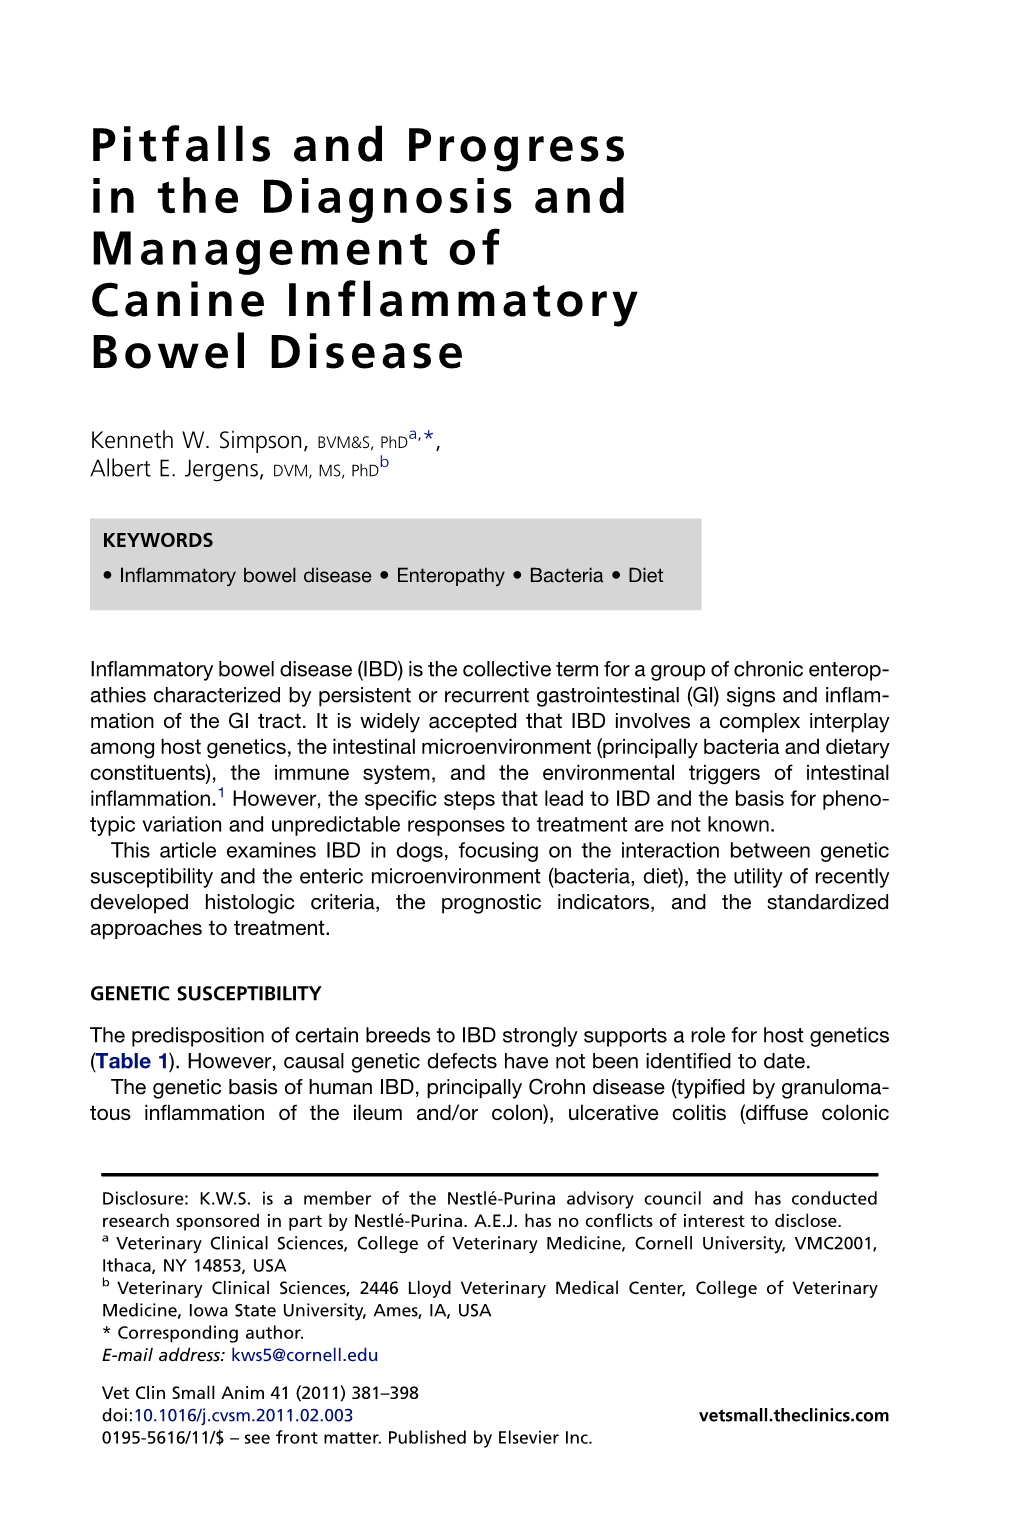 Pitfalls and Progress in the Diagnosis and Management of Canine Inflammatory Bowel Disease